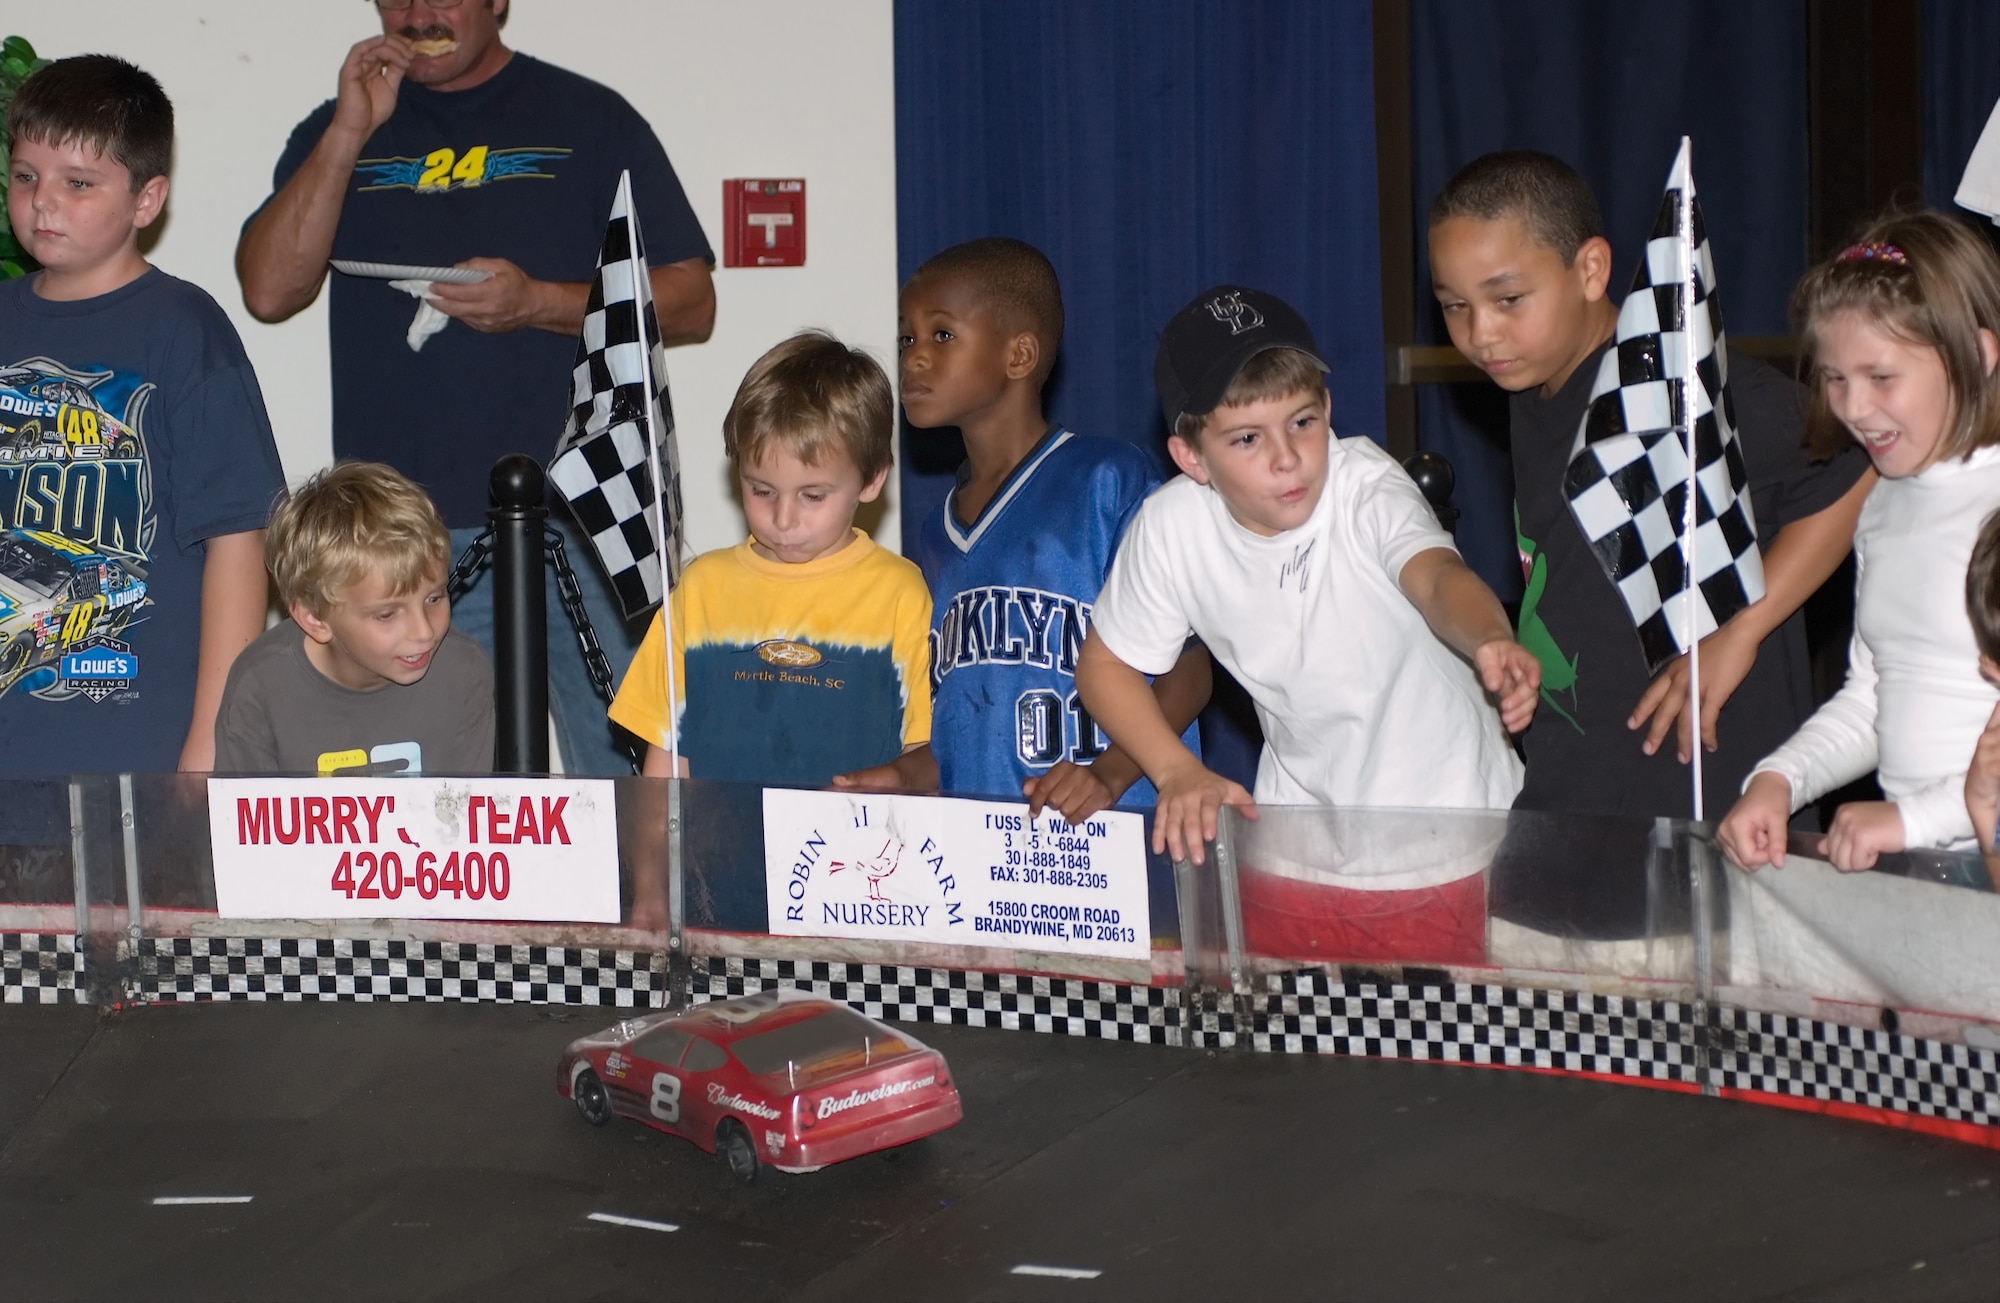 Children of Dover members race remote control cars around a track at the NASCAR Social Friday night at The Landings Club. The track allows participants to race custom designed cars around a 16-foot by 24-foot, high-banks race track. Other activities at the social included a race car simulator, moon bounces and give aways for attendees. The Air Mobility Command Matchup game Dover Air Force Base winners were also awarded cash and prizes at the end of the night. (U.S. Air Force photo/Jason Minto)